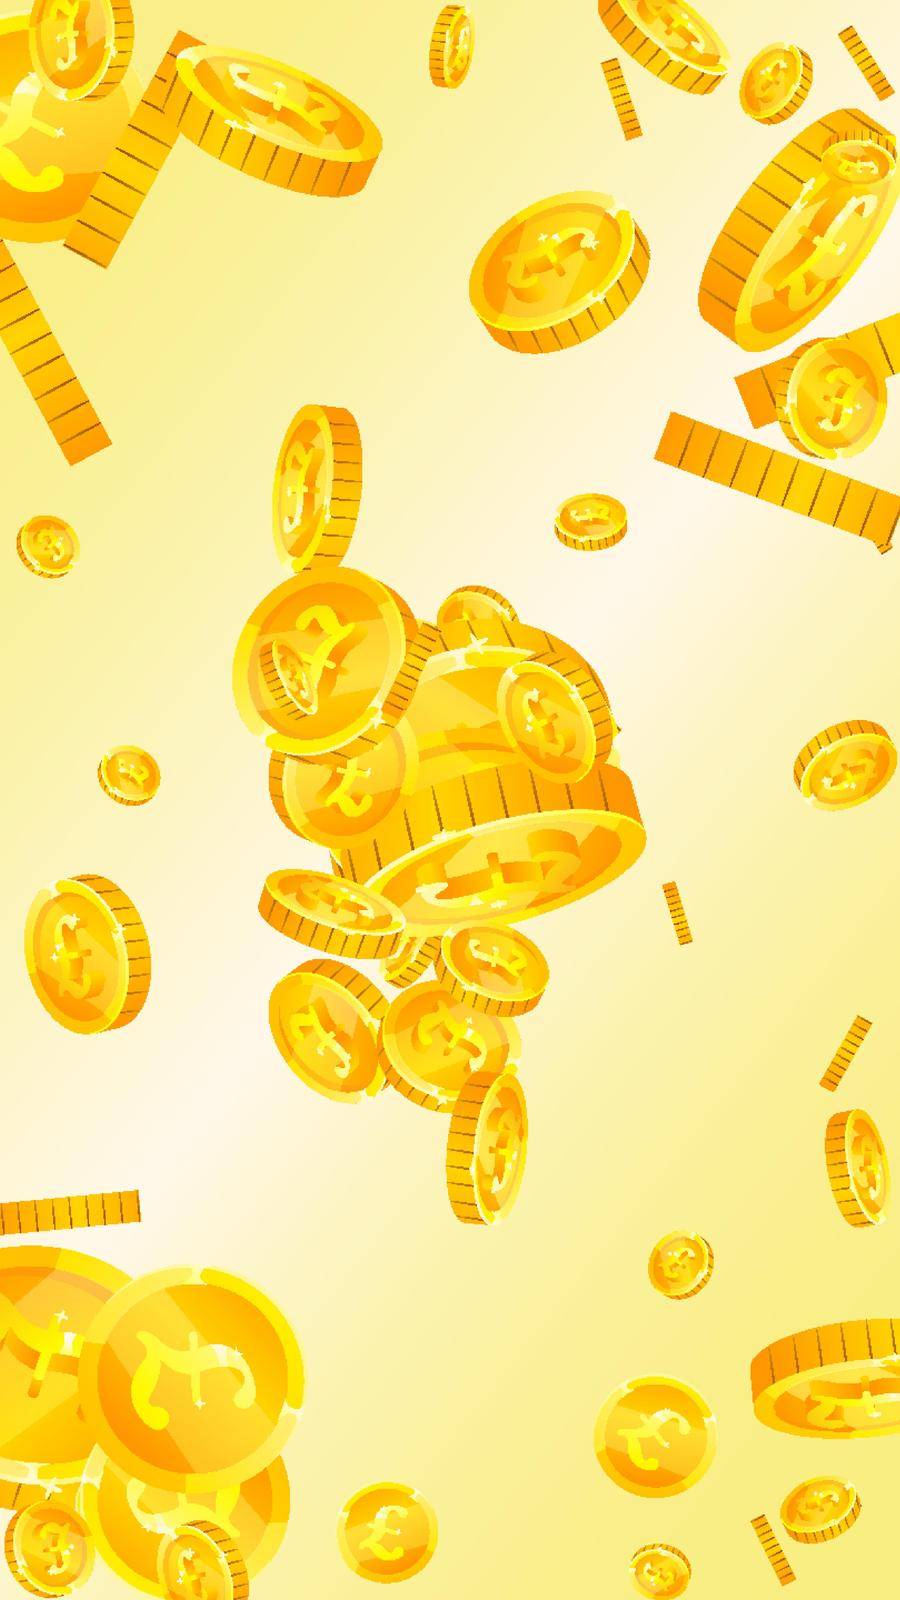 British pound coins falling. Memorable scattered GBP coins. United Kingdom money. Outstanding jackpot, wealth or success concept. Vector illustration. by beginagain